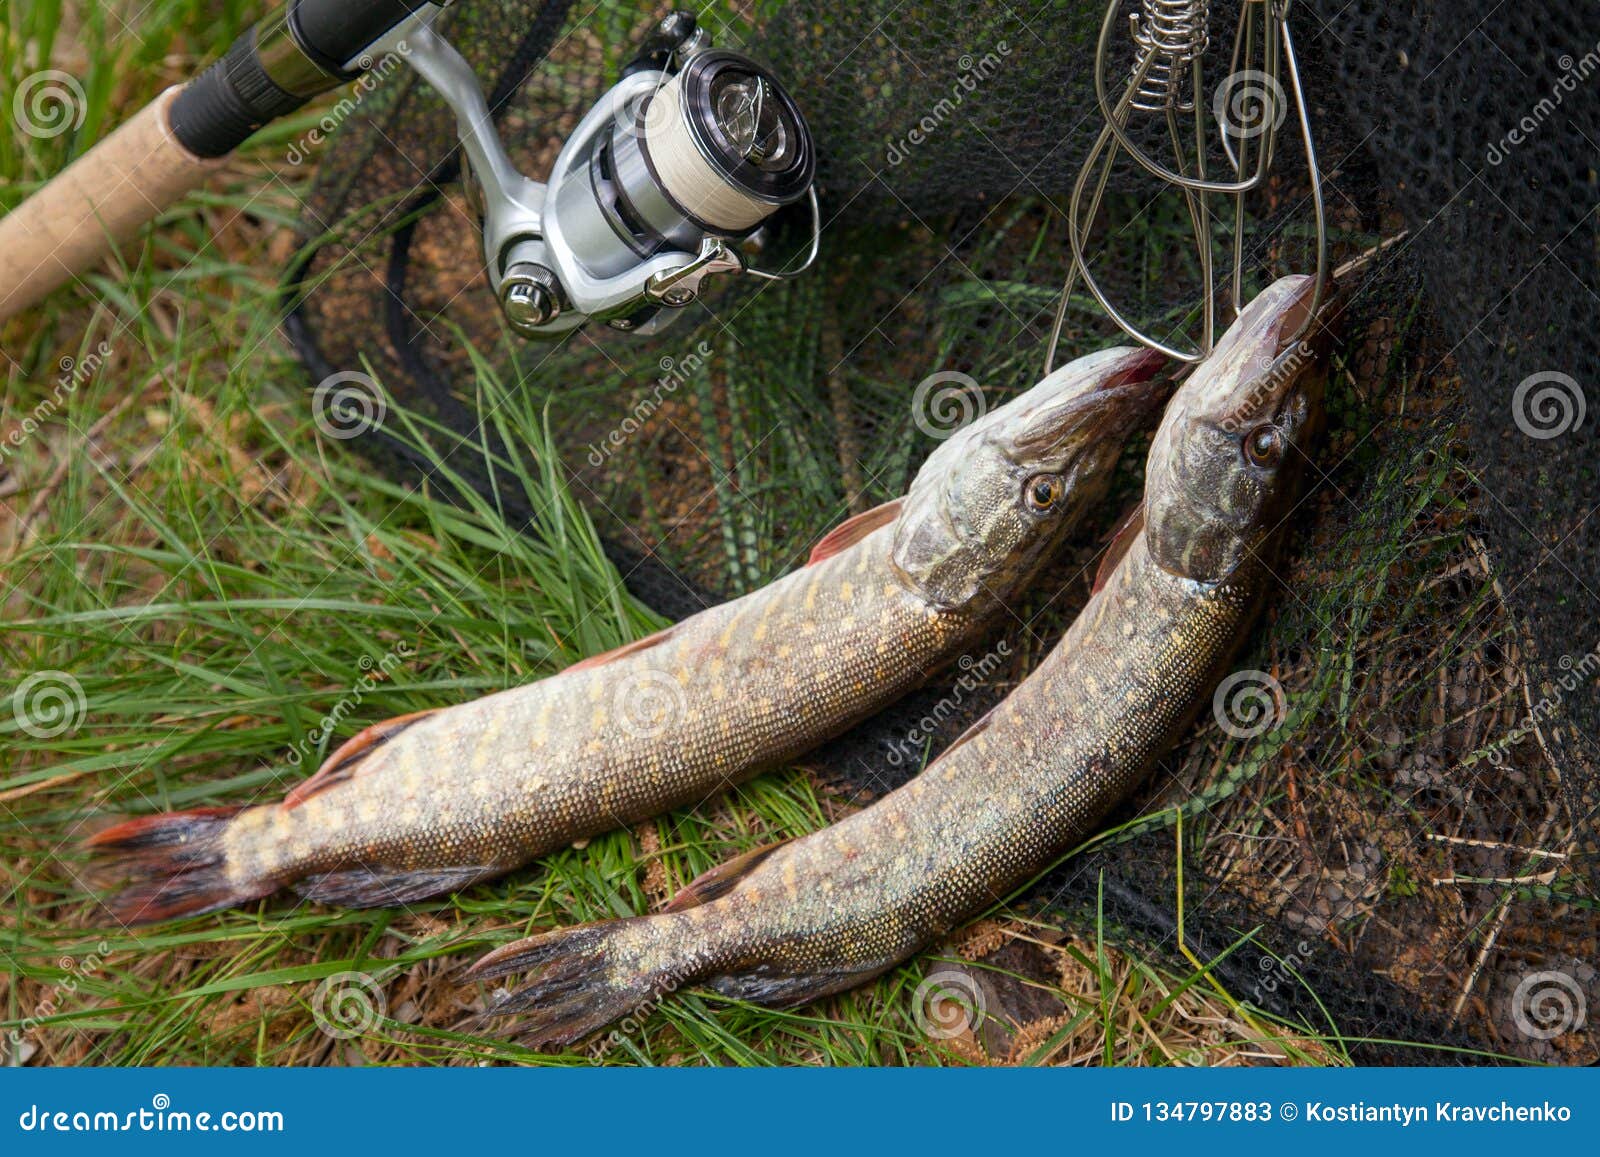 Good Catch. Two Freshwater Pike Fish on Fish Stringer on Natural Background  Stock Image - Image of lake, outdoors: 134797883